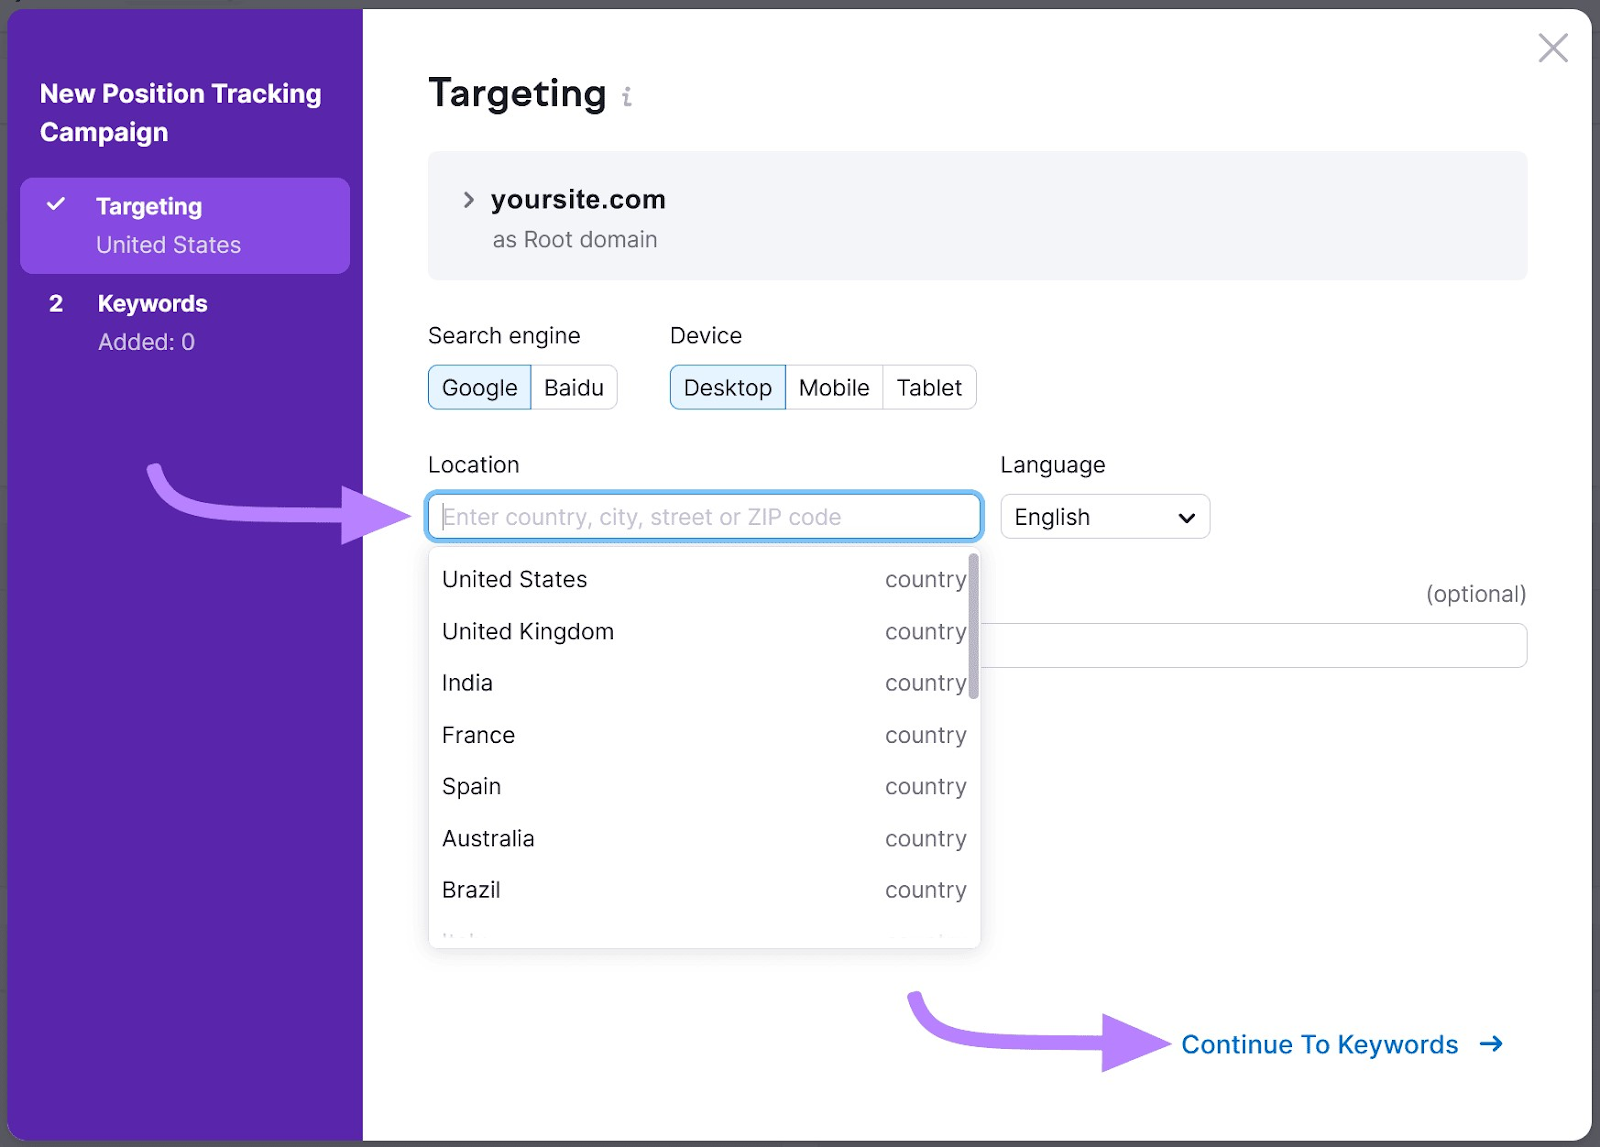 "Targeting" screen in Position Tracking Settings